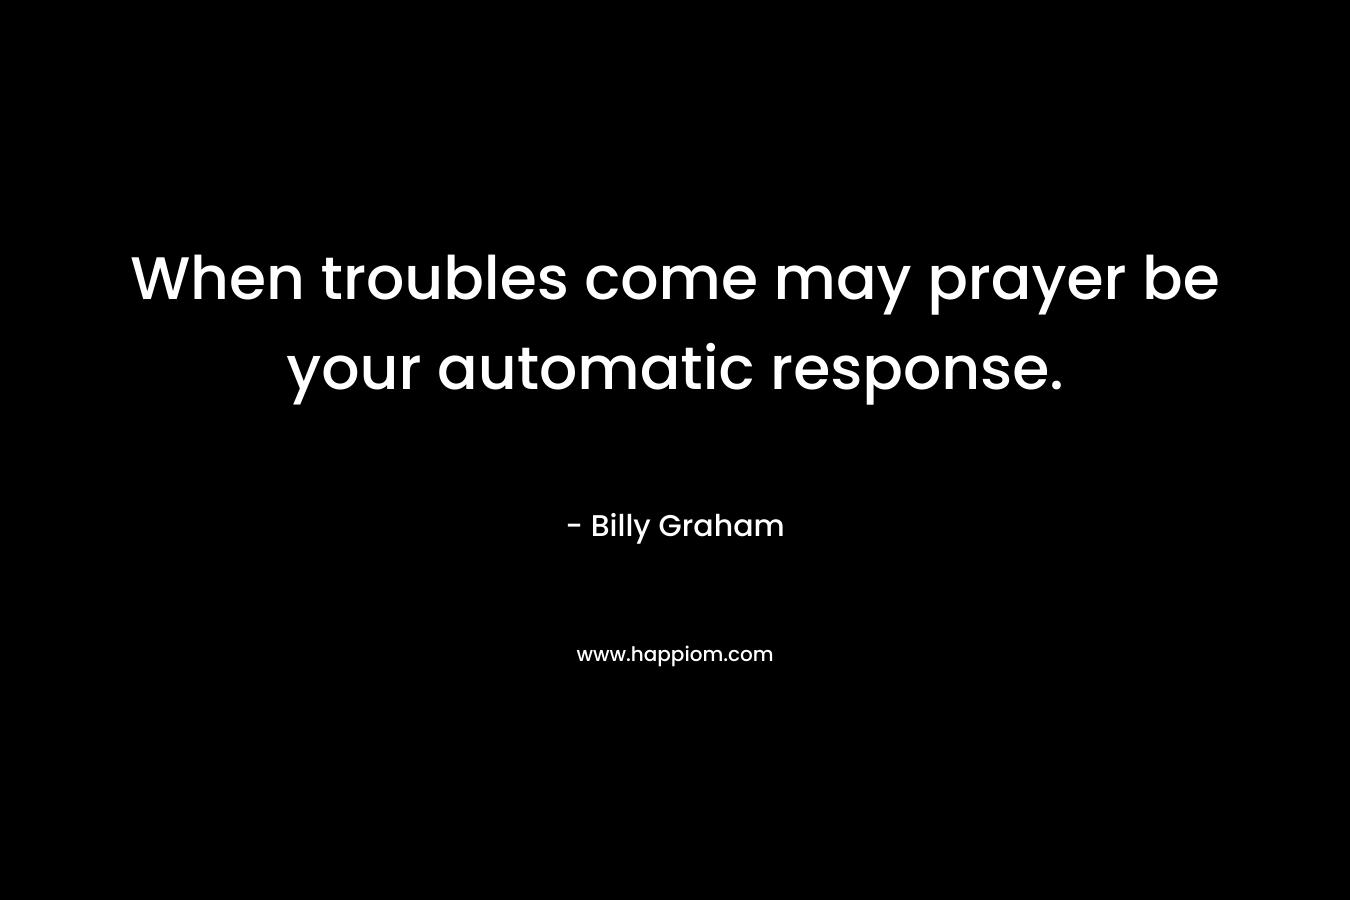 When troubles come may prayer be your automatic response.